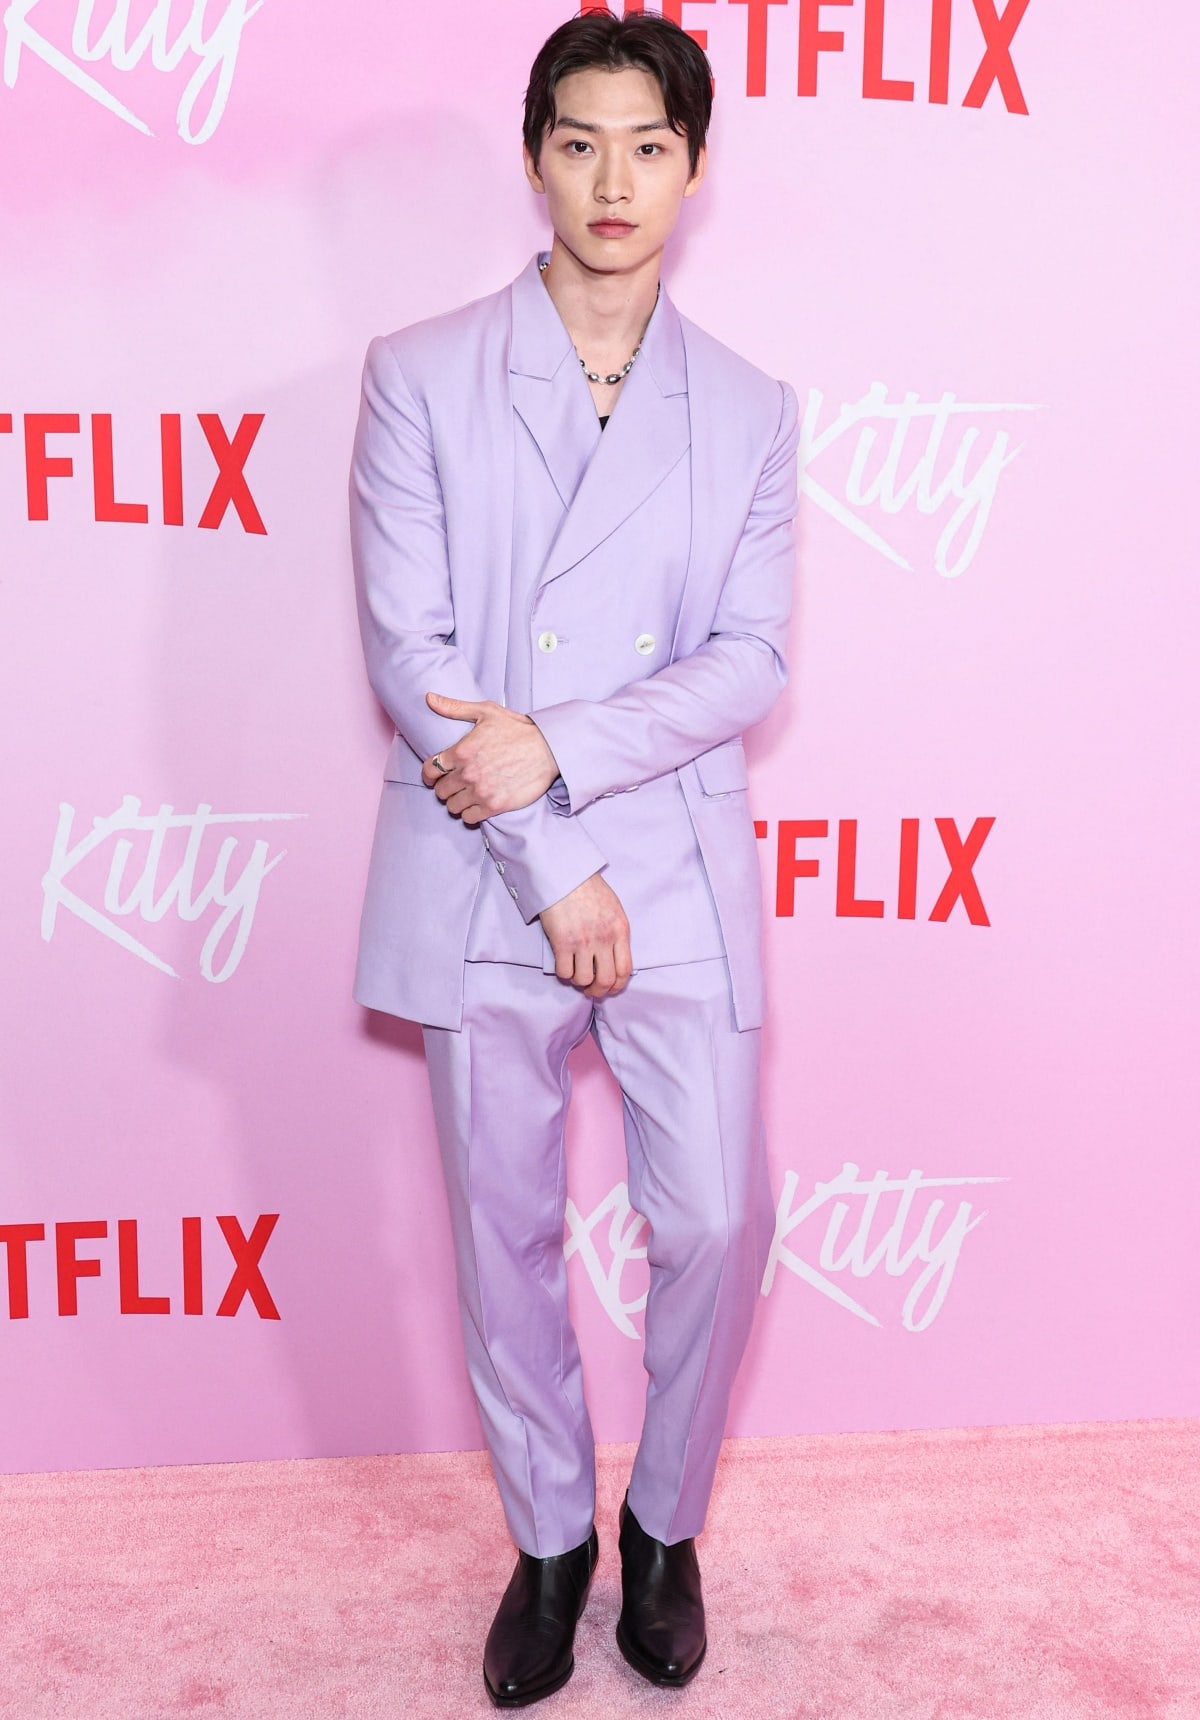 Sang Heon Lee in a lavender suit at the Los Angeles premiere event of Netflix’s XO, Kitty Season 1